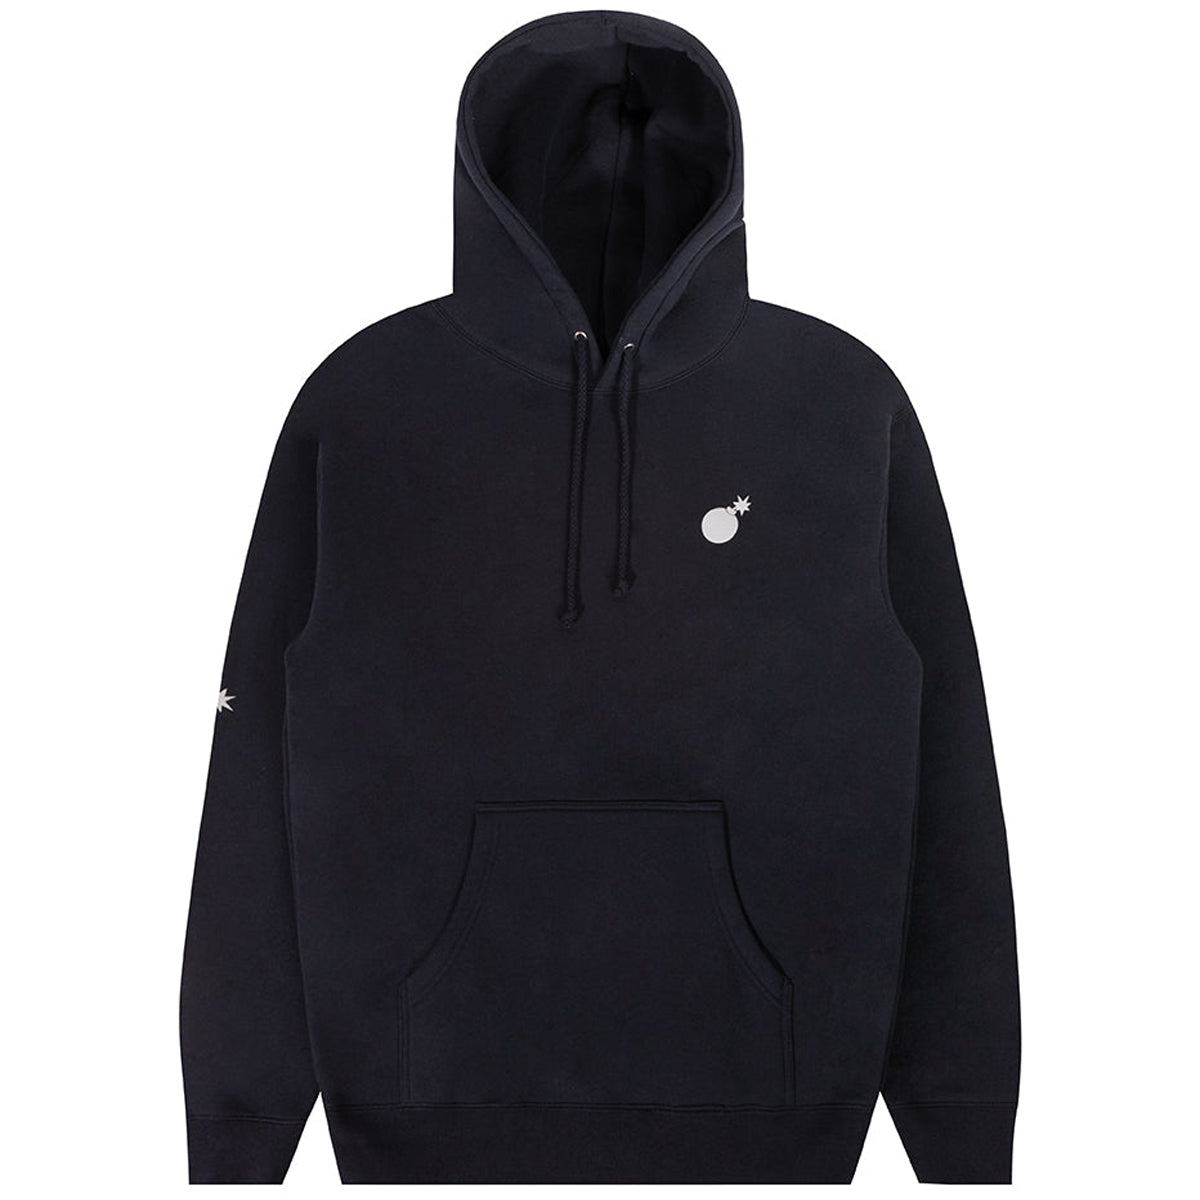 The Hundreds Solid Bomb Crest Hoodie - Navy image 1